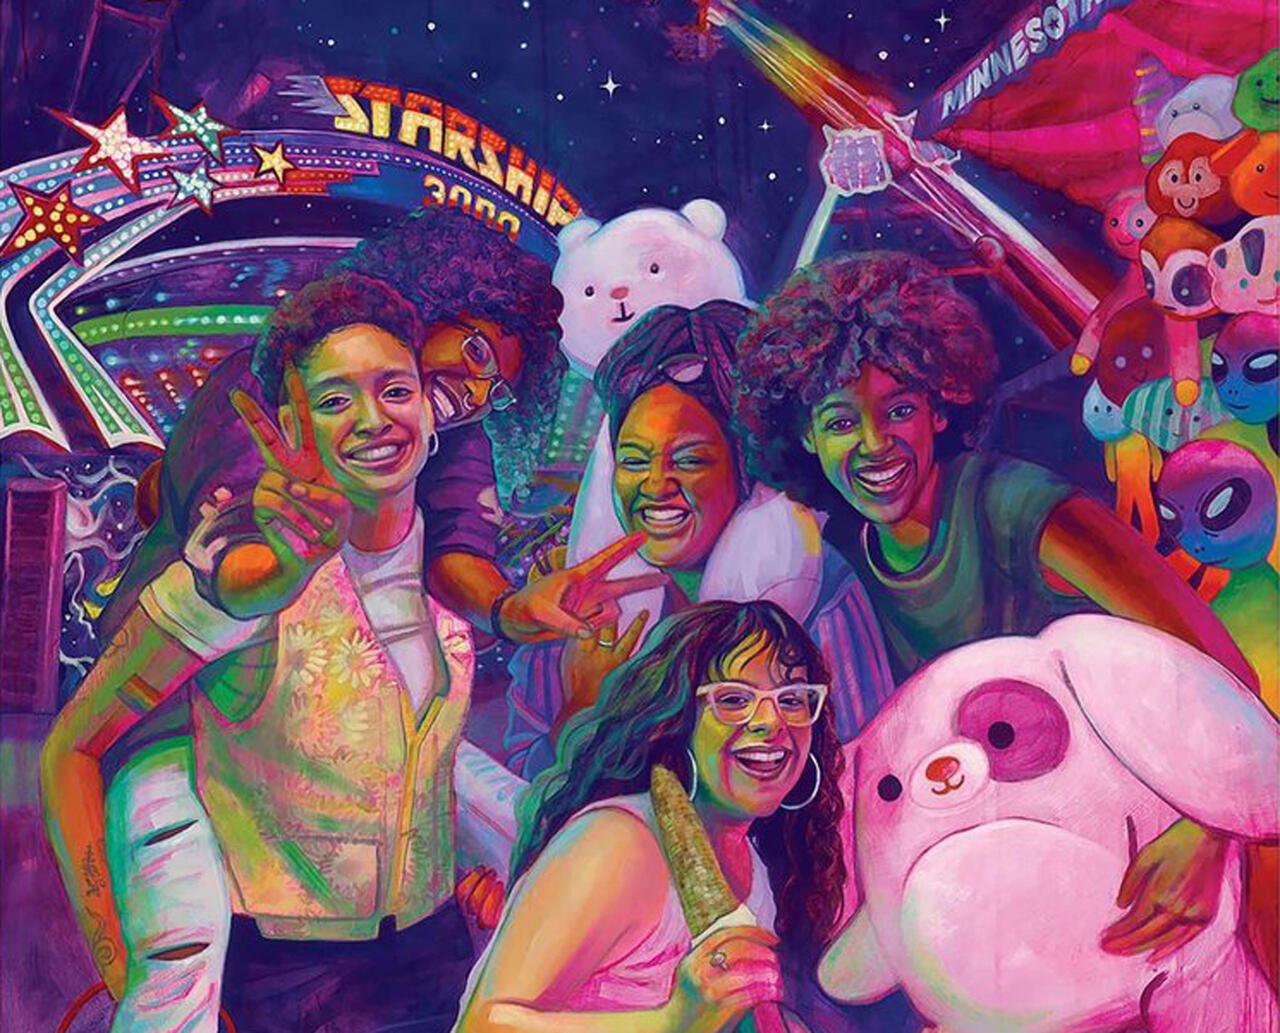 An oil painting of people at the state fair in front of rides and holding prizes